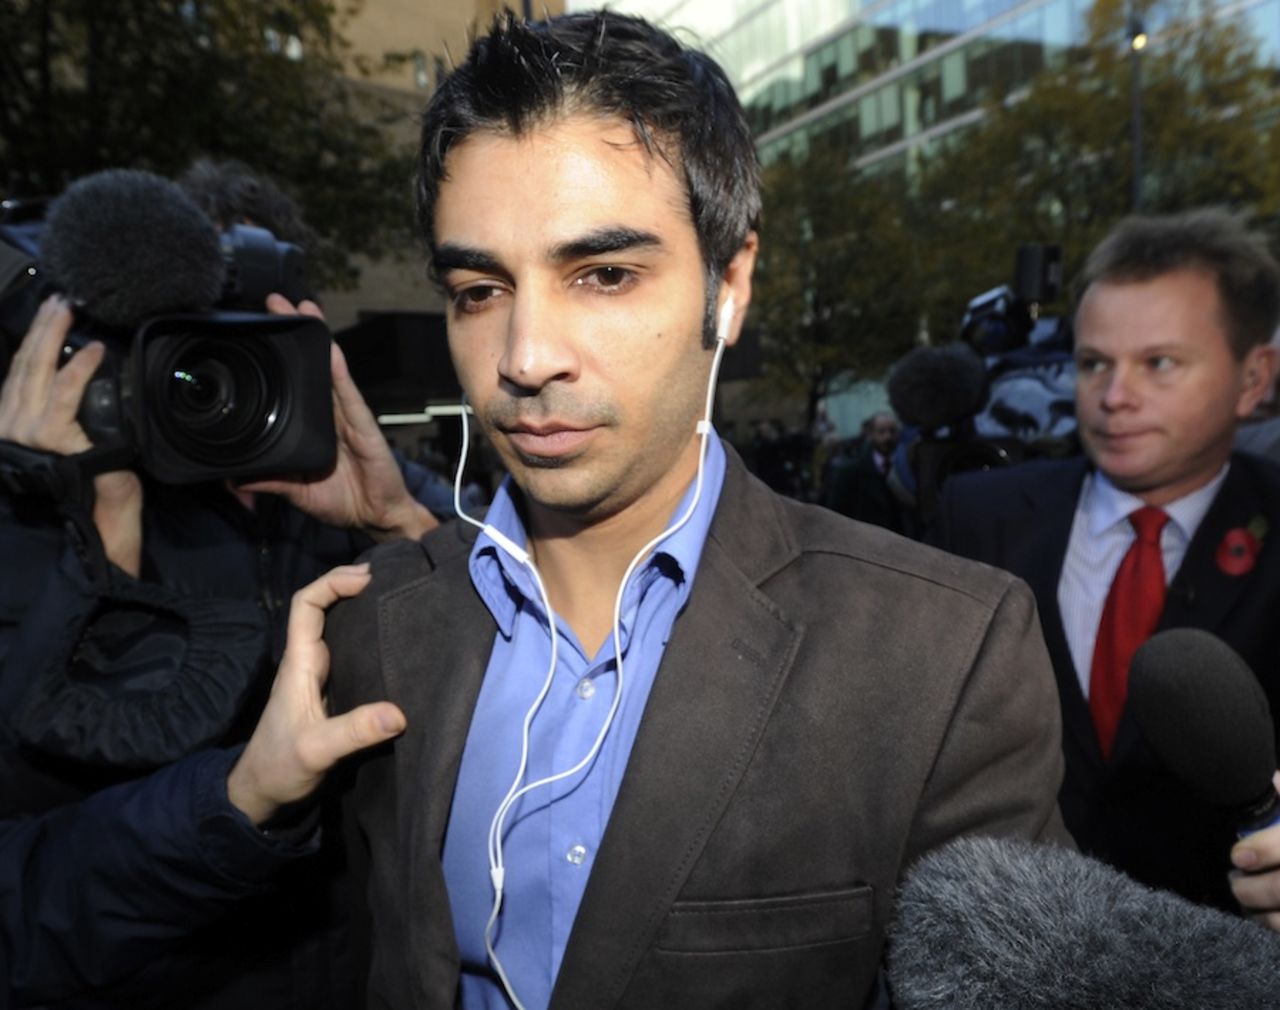 Salman Butt leaves Southwark Crown Court after being found guilty of cheating and accepting corrupt payments, London, November 1, 2011